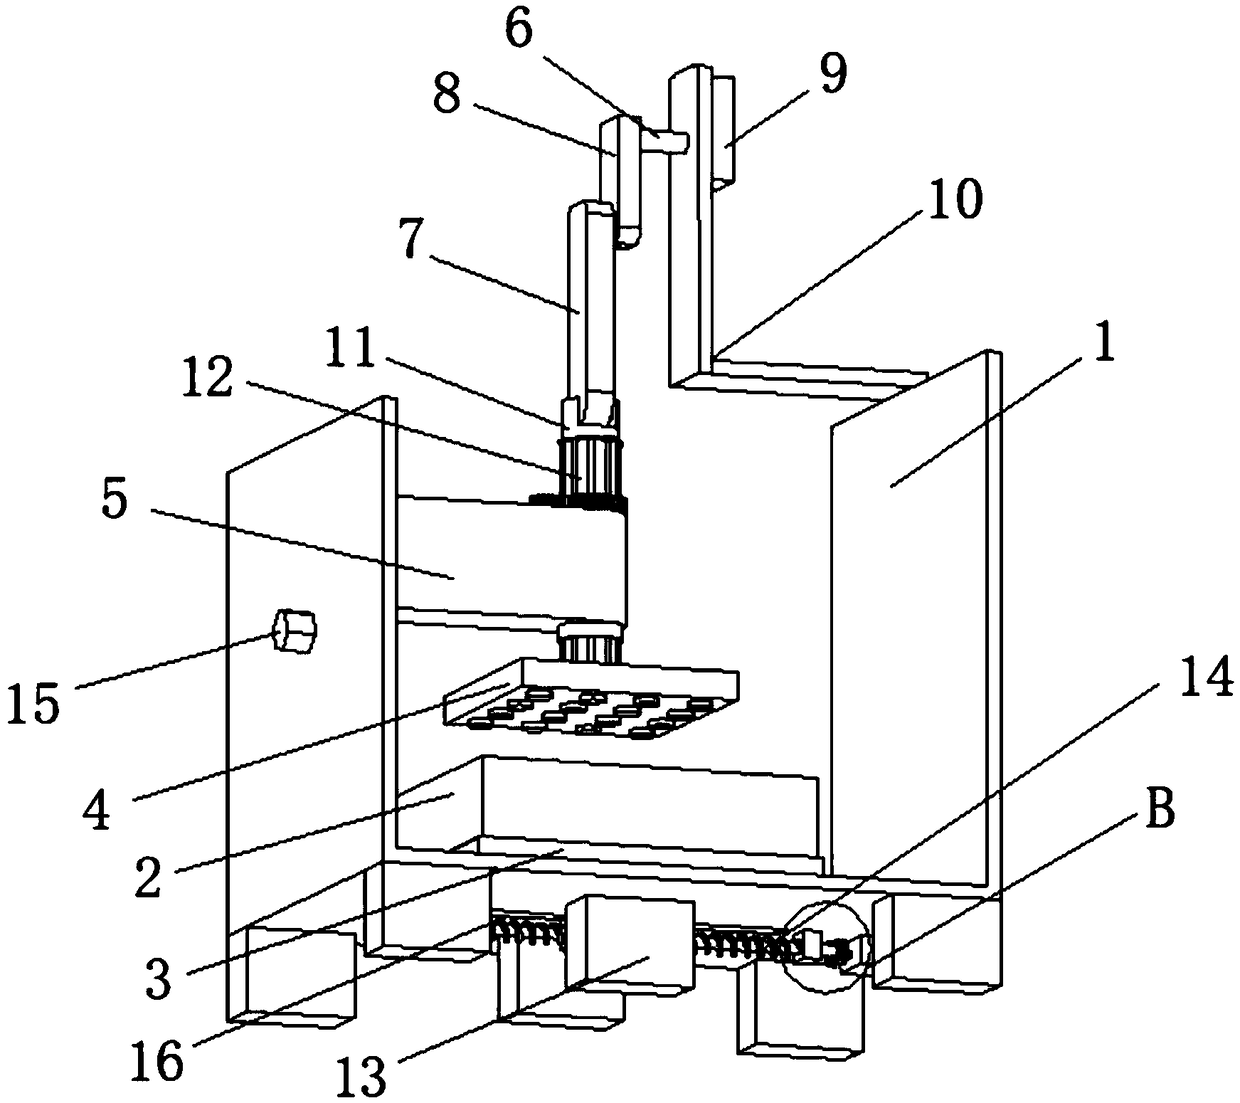 Hammering apparatus used for meat products